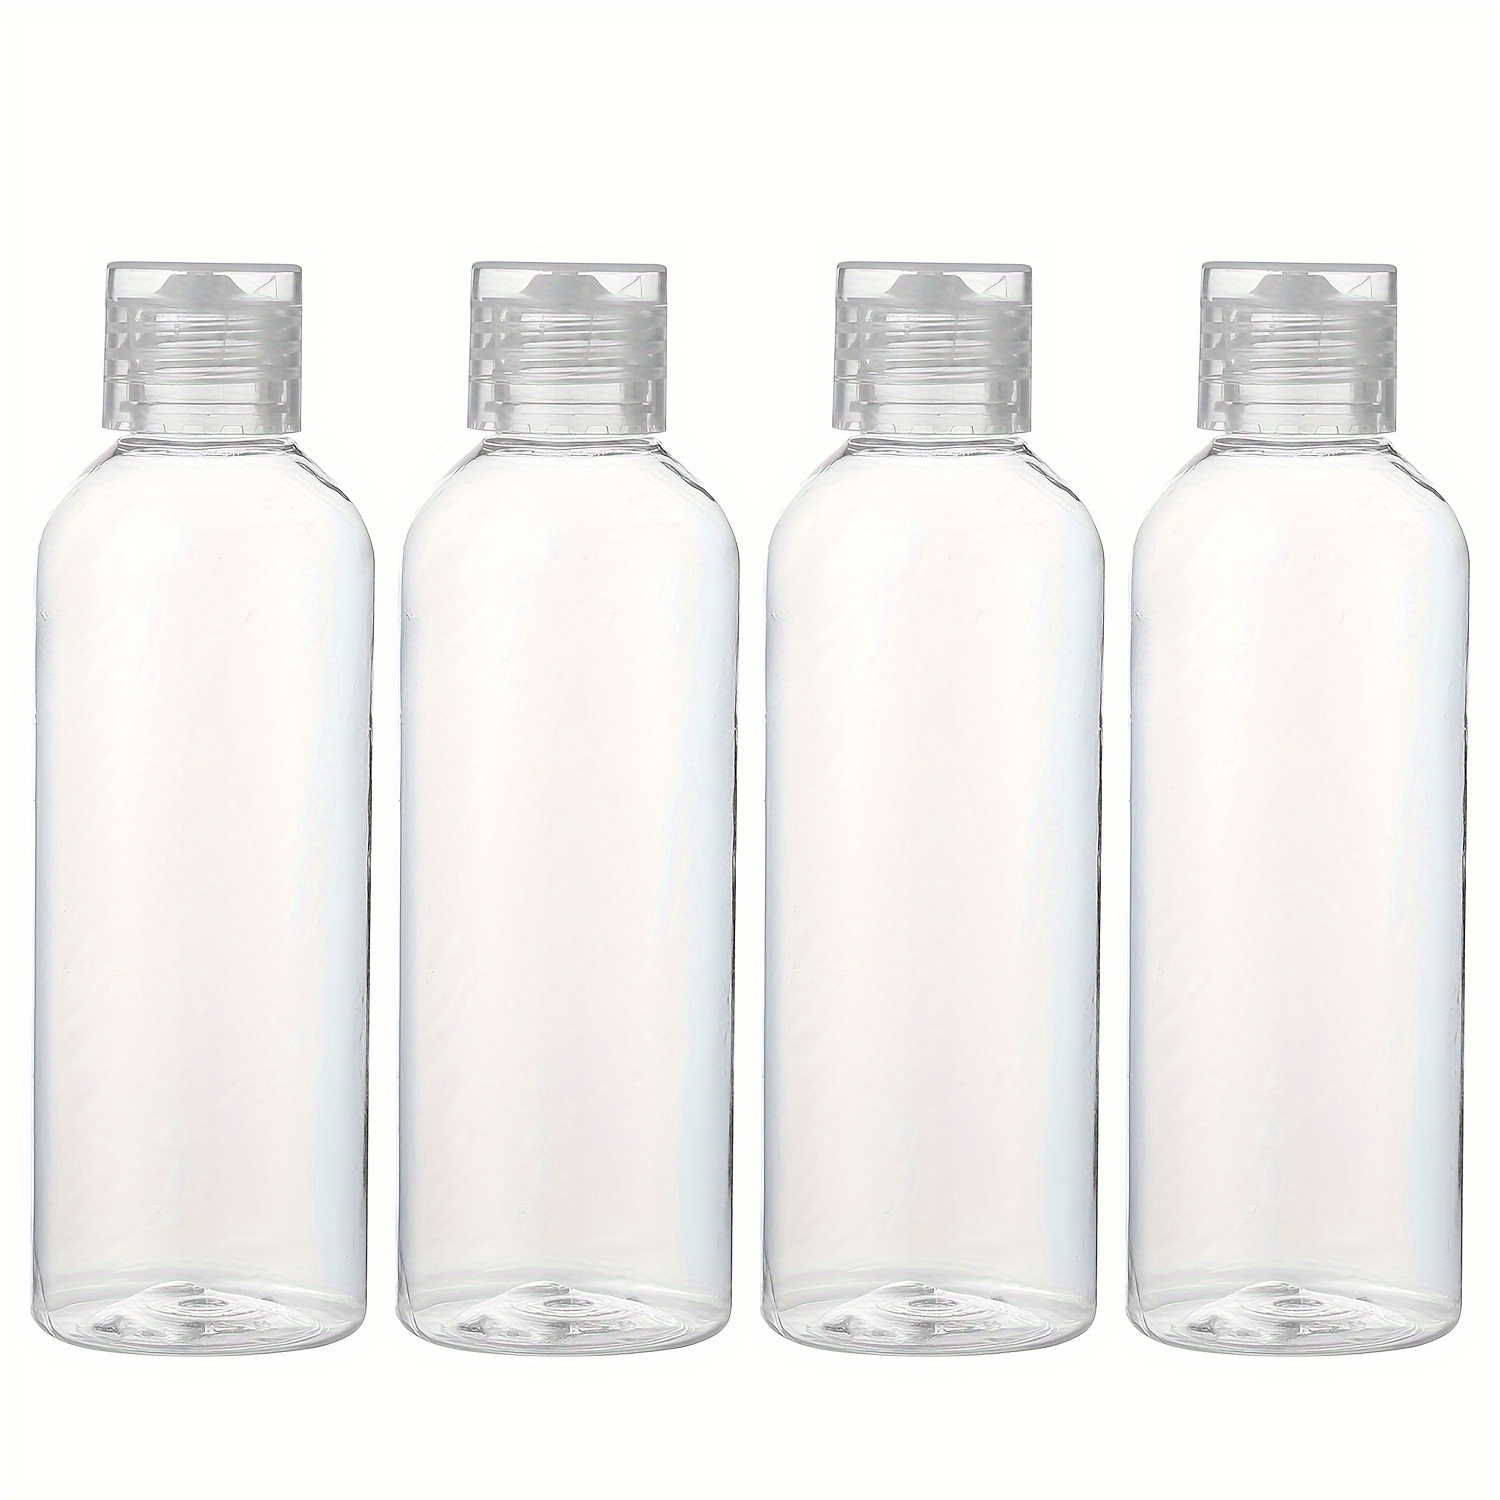 50ml SMALL STRONG ROUND PLASTIC BOTTLES SCREW FLIP TOP LID TRAVEL